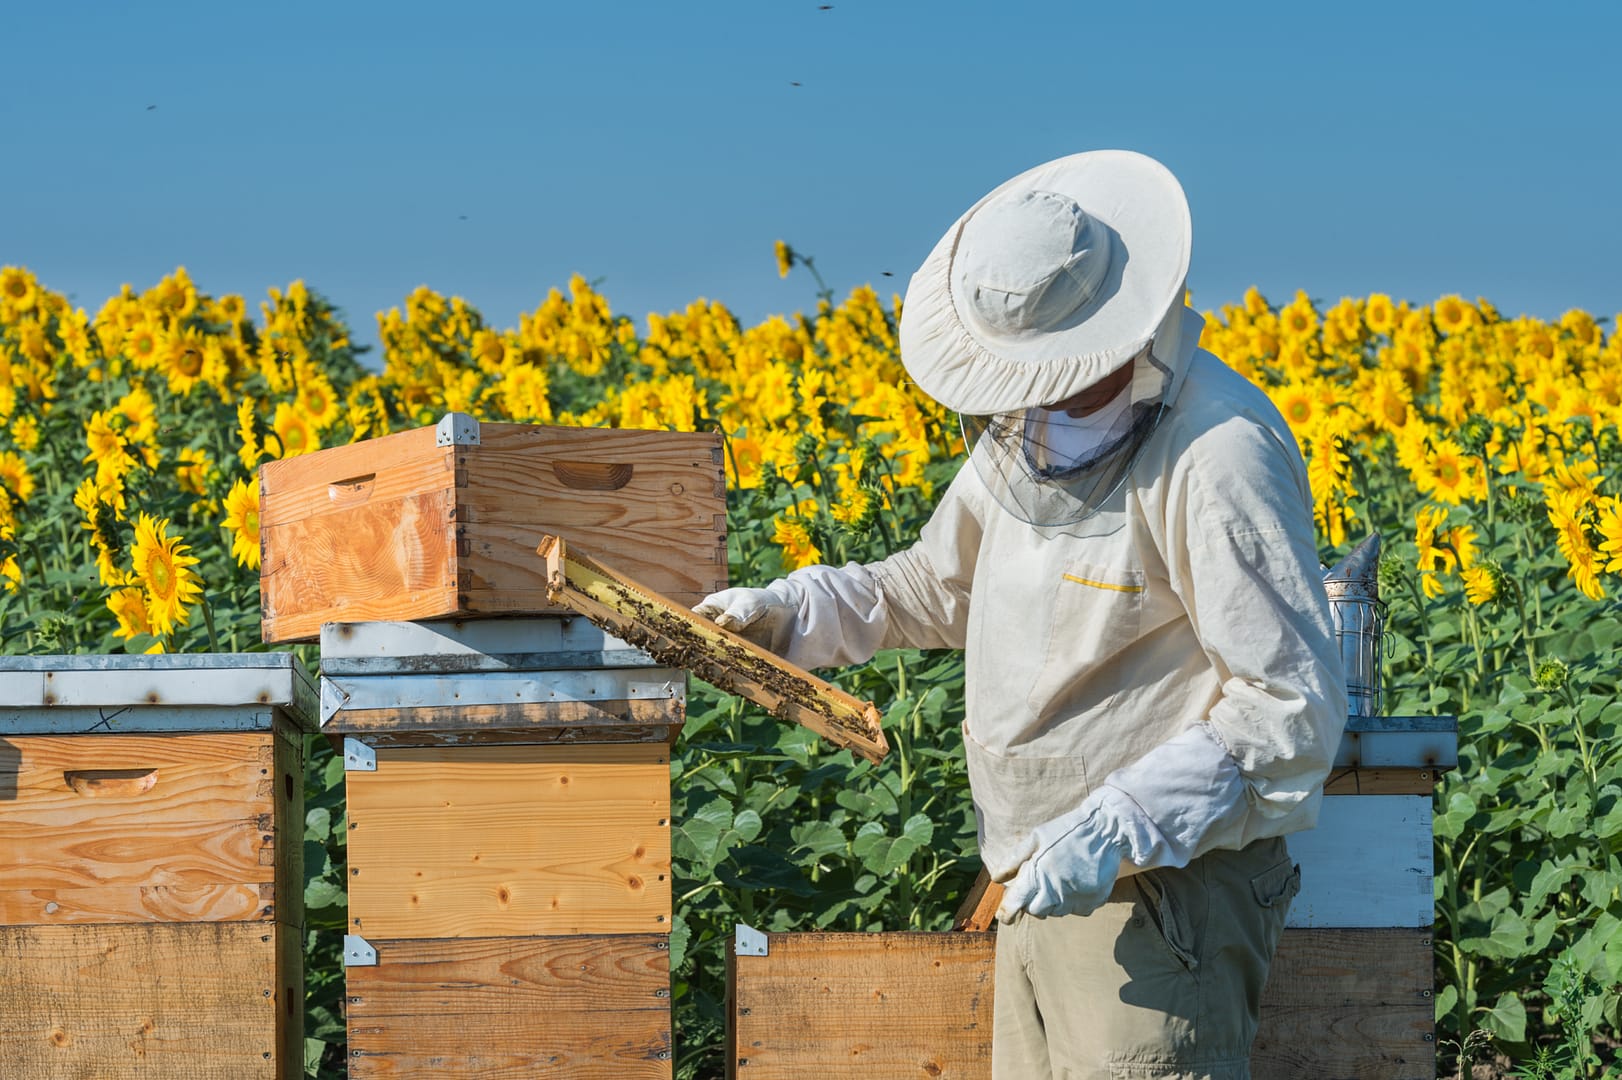 A beekeeper in protective gear harvesting honey from a beehive and a group of people celebrating National Honey Bee Day